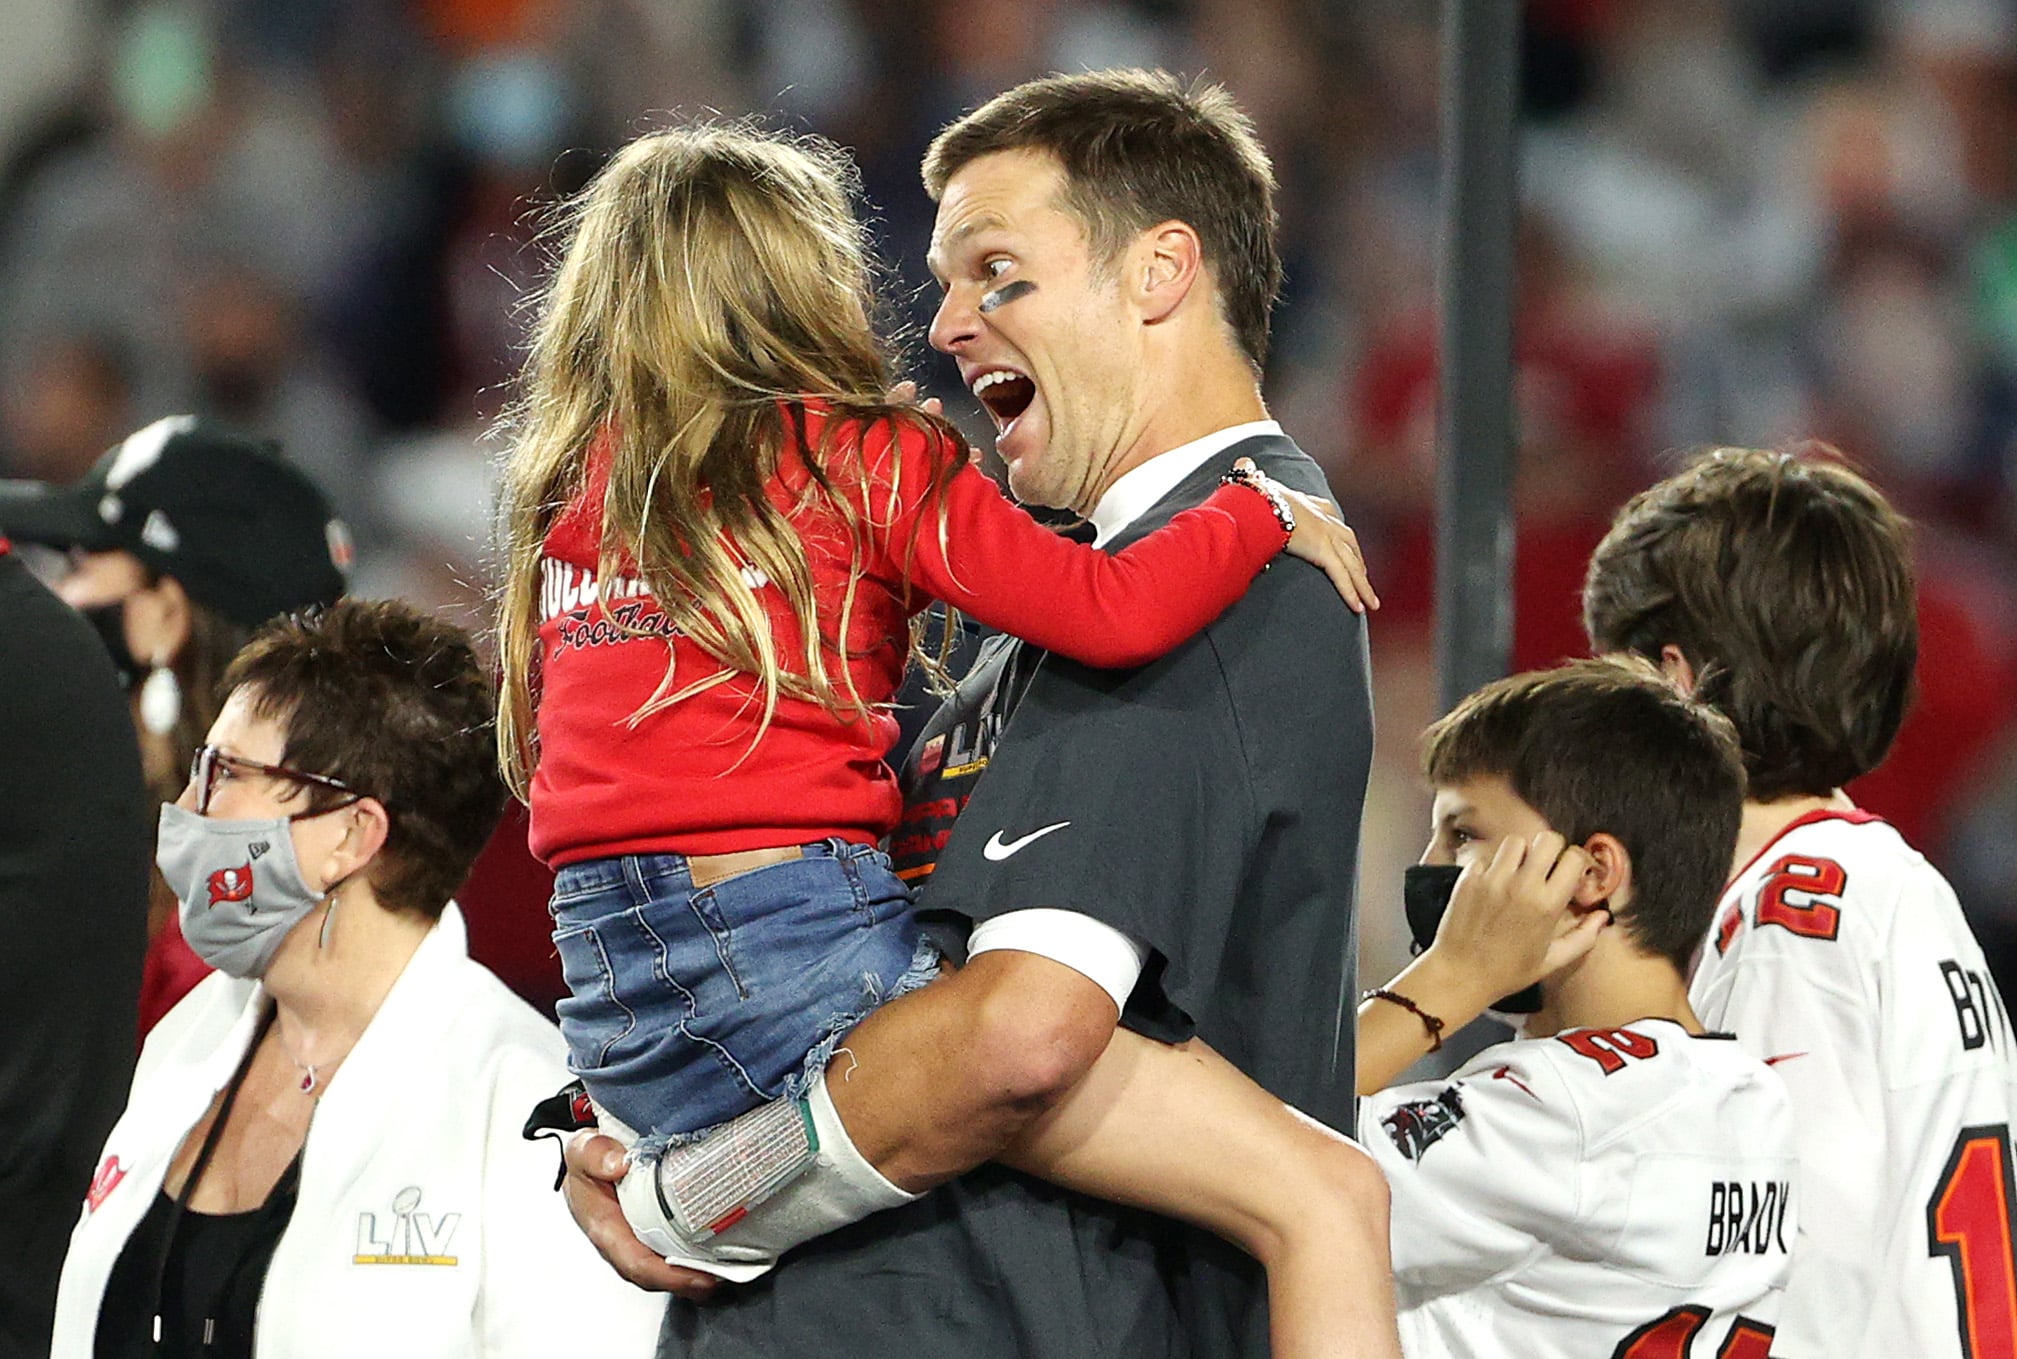 Video: Tom Brady shares huge hug with his family after Super Bowl win